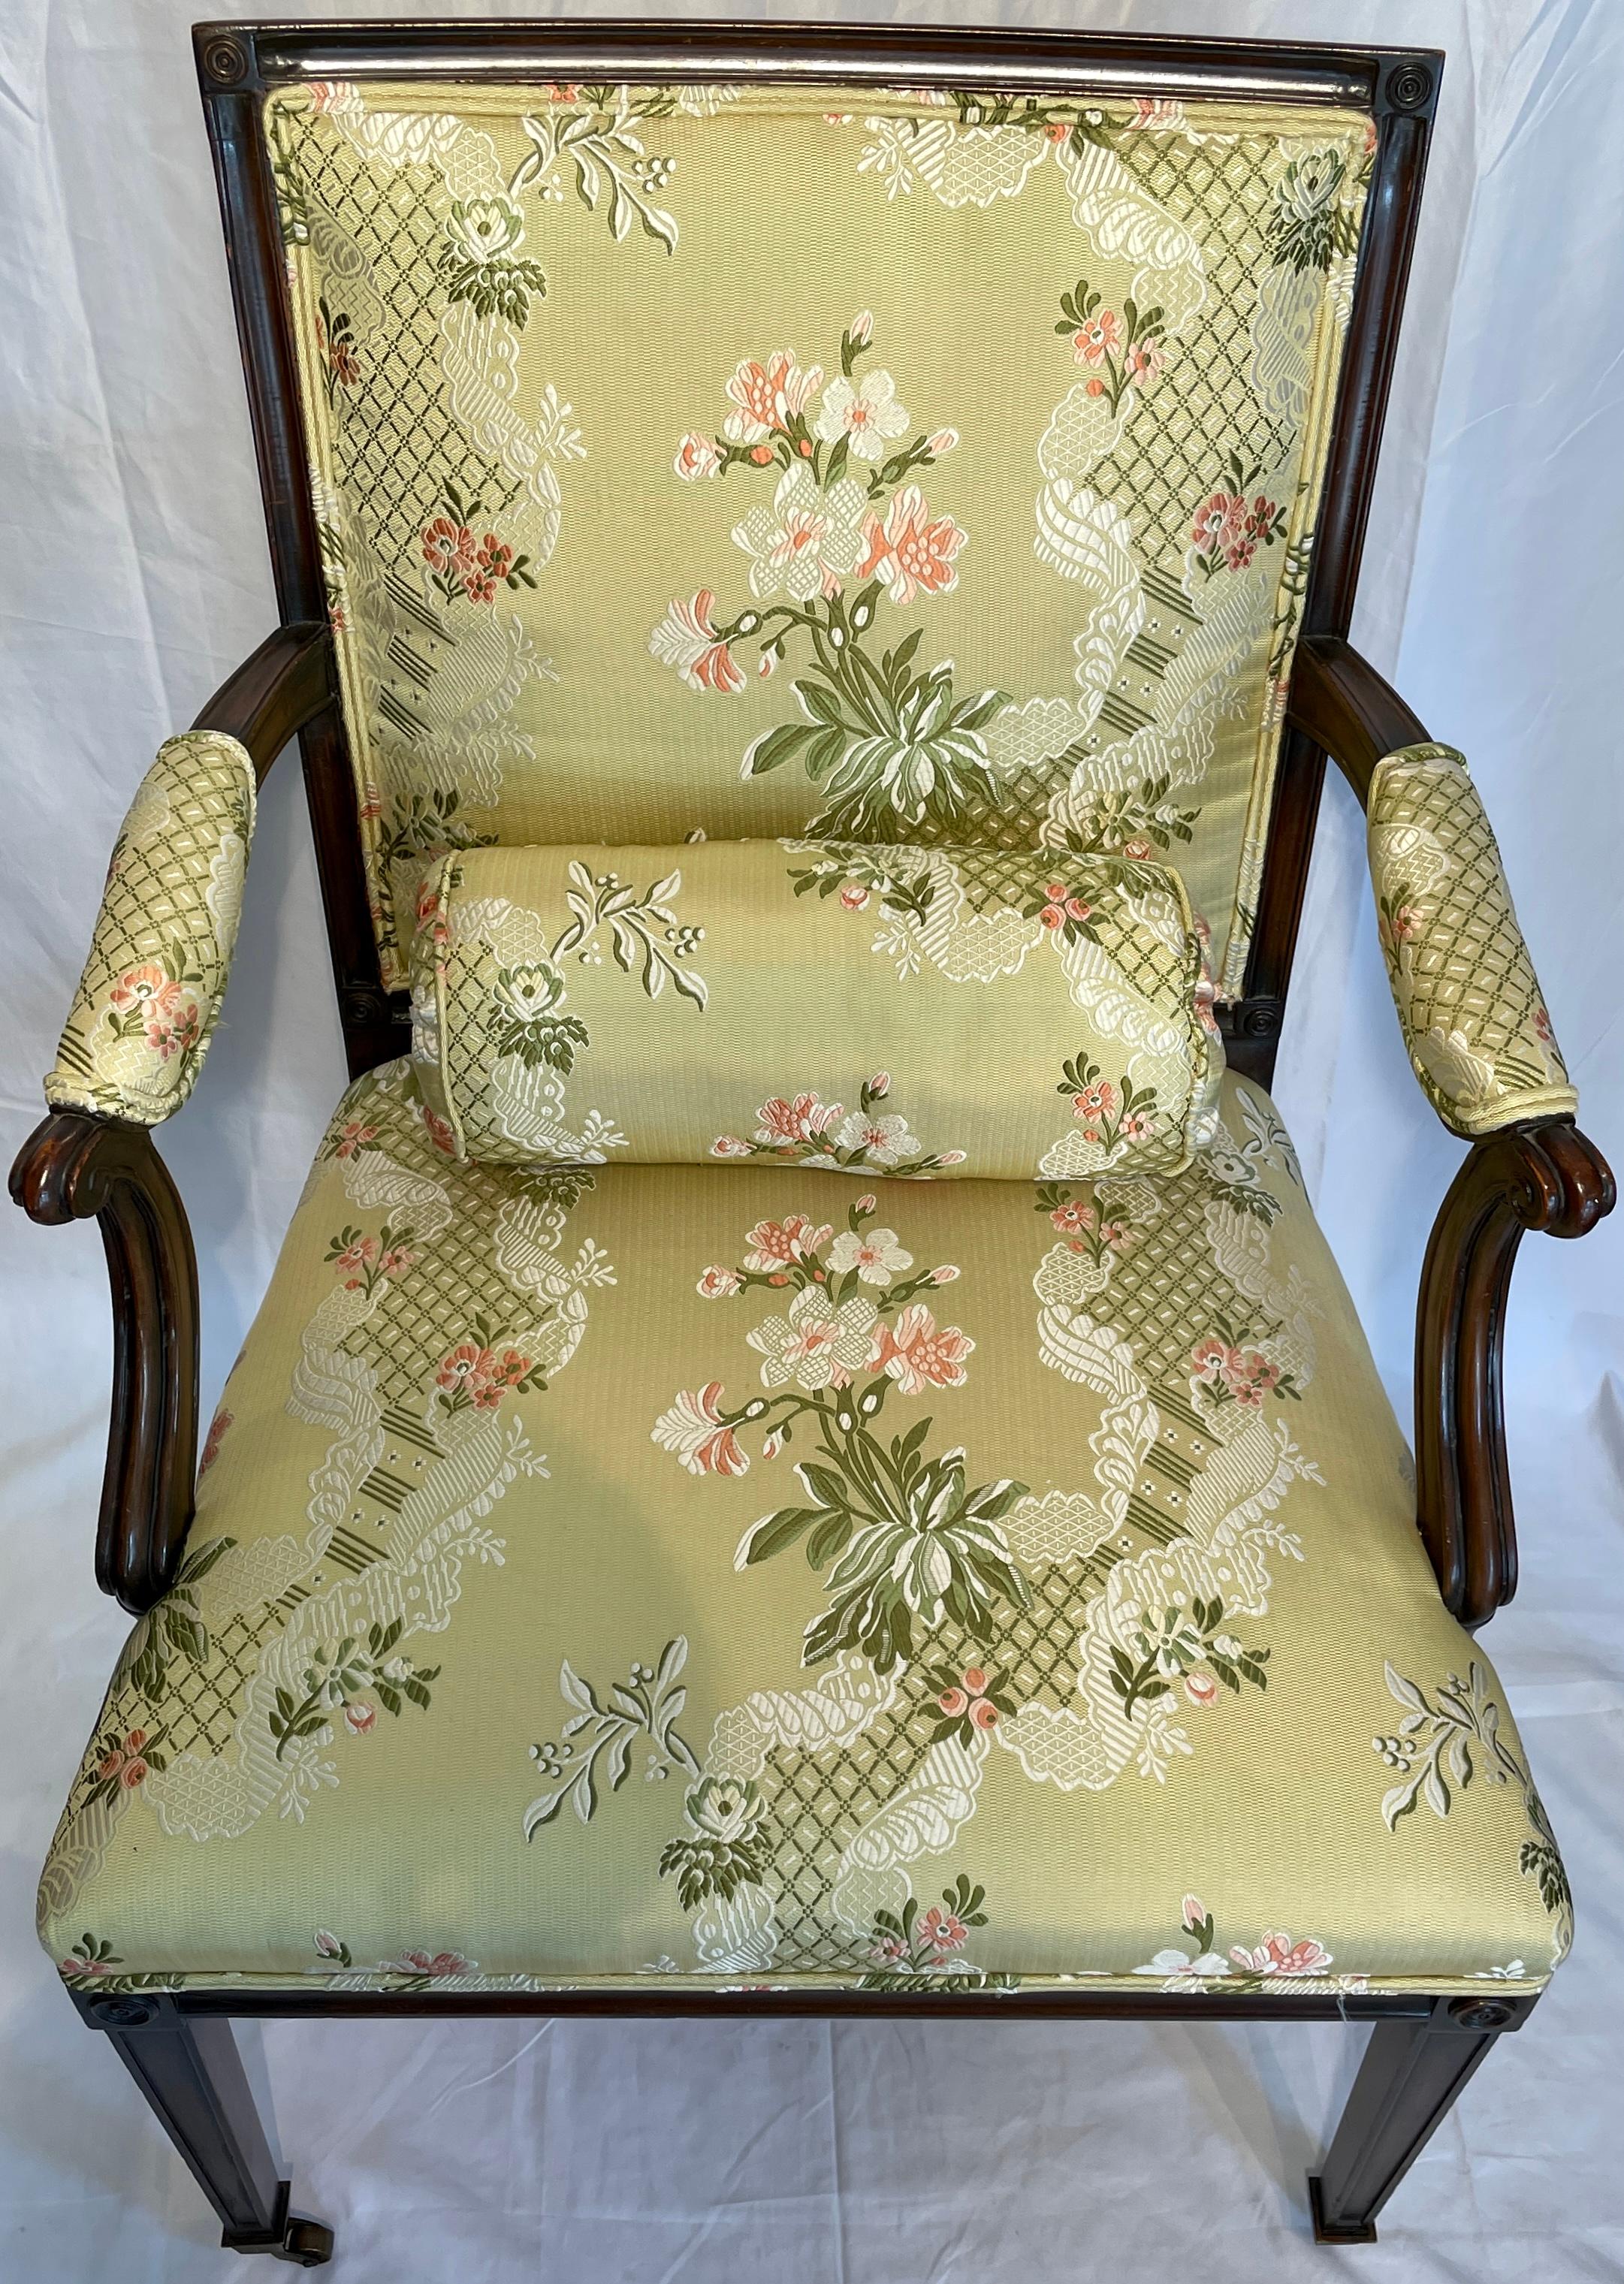 Antique English Mahogany Desk Chair with Scalamandre Fabric, Circa 1850-1860 In Good Condition For Sale In New Orleans, LA